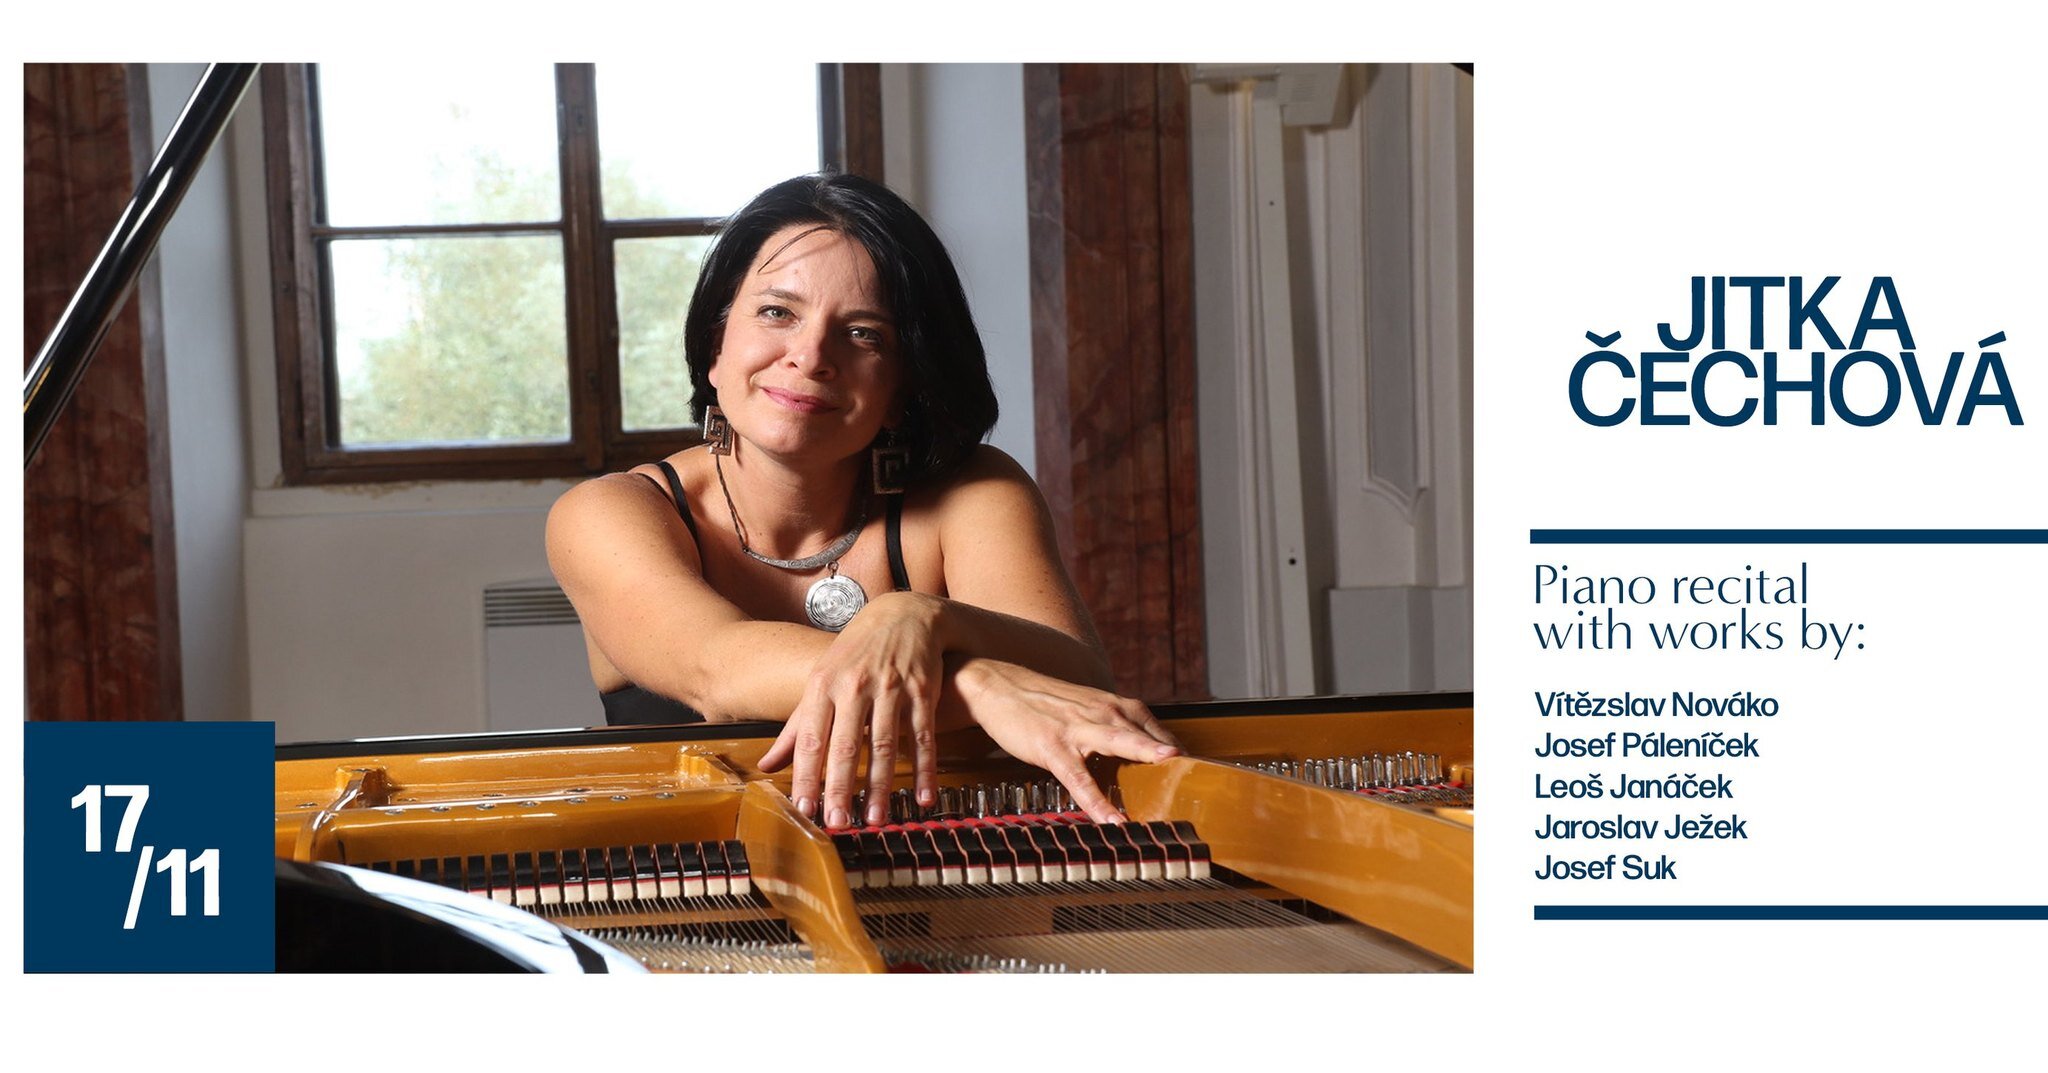 17/11/2023 at 19.00 : Commemorative concert with the talented pianist Jitka Cechova in memory of the Velvet Revolution, co-organised by Music Enterprise (Geoffrey Piper) , The Embassy of the Czech Republic in Luxembourg, and ATSL - Amiti&eacute;s tch